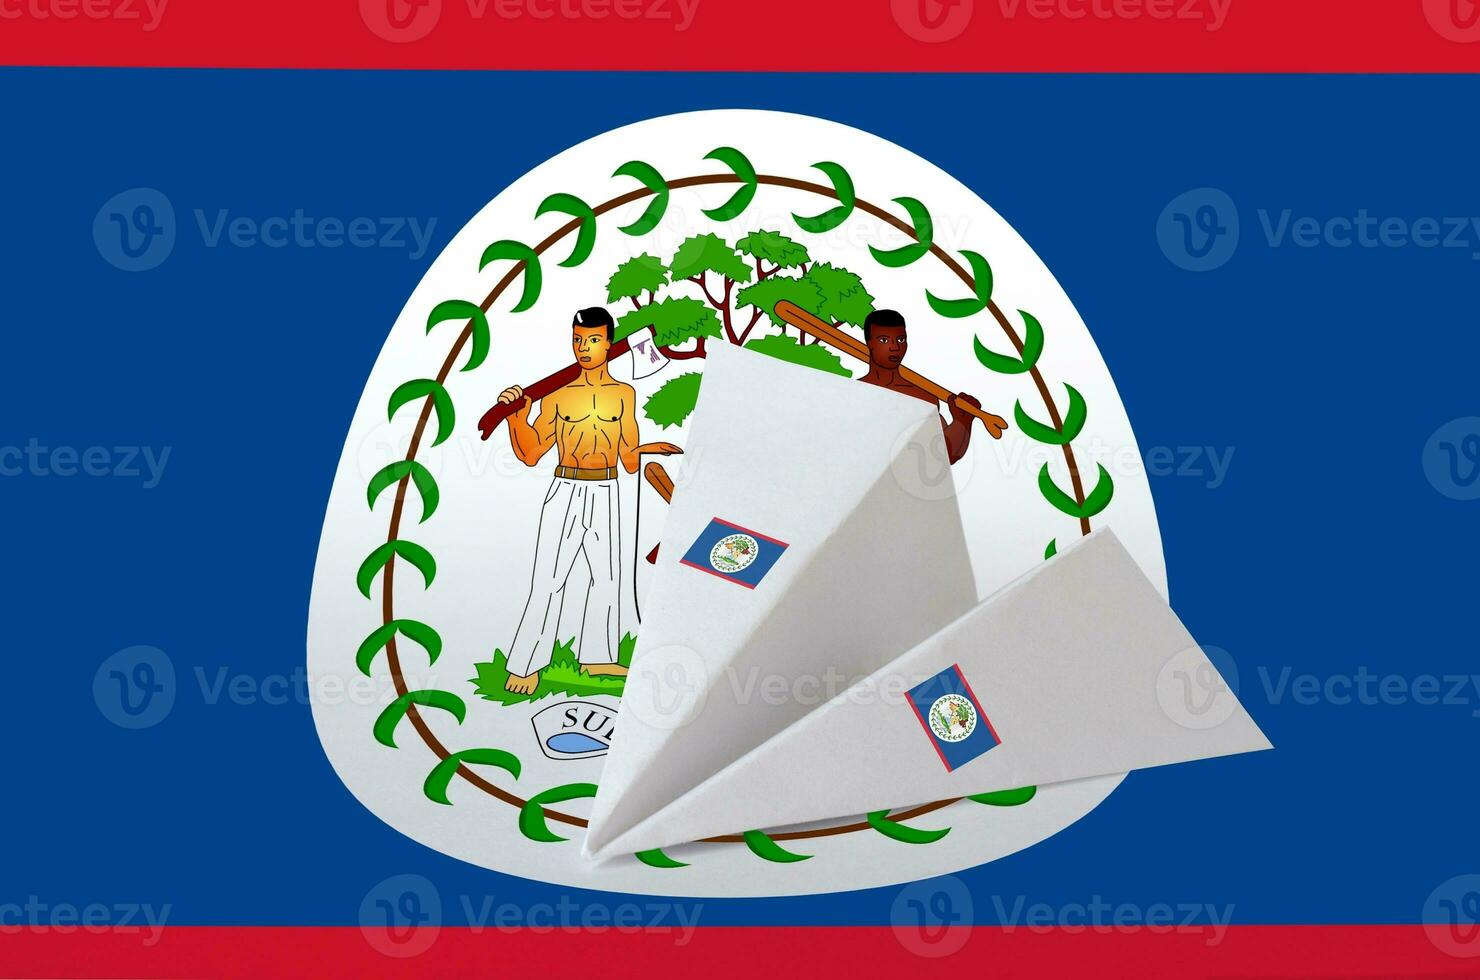 Belize flag depicted on paper origami airplane. Handmade arts concept photo